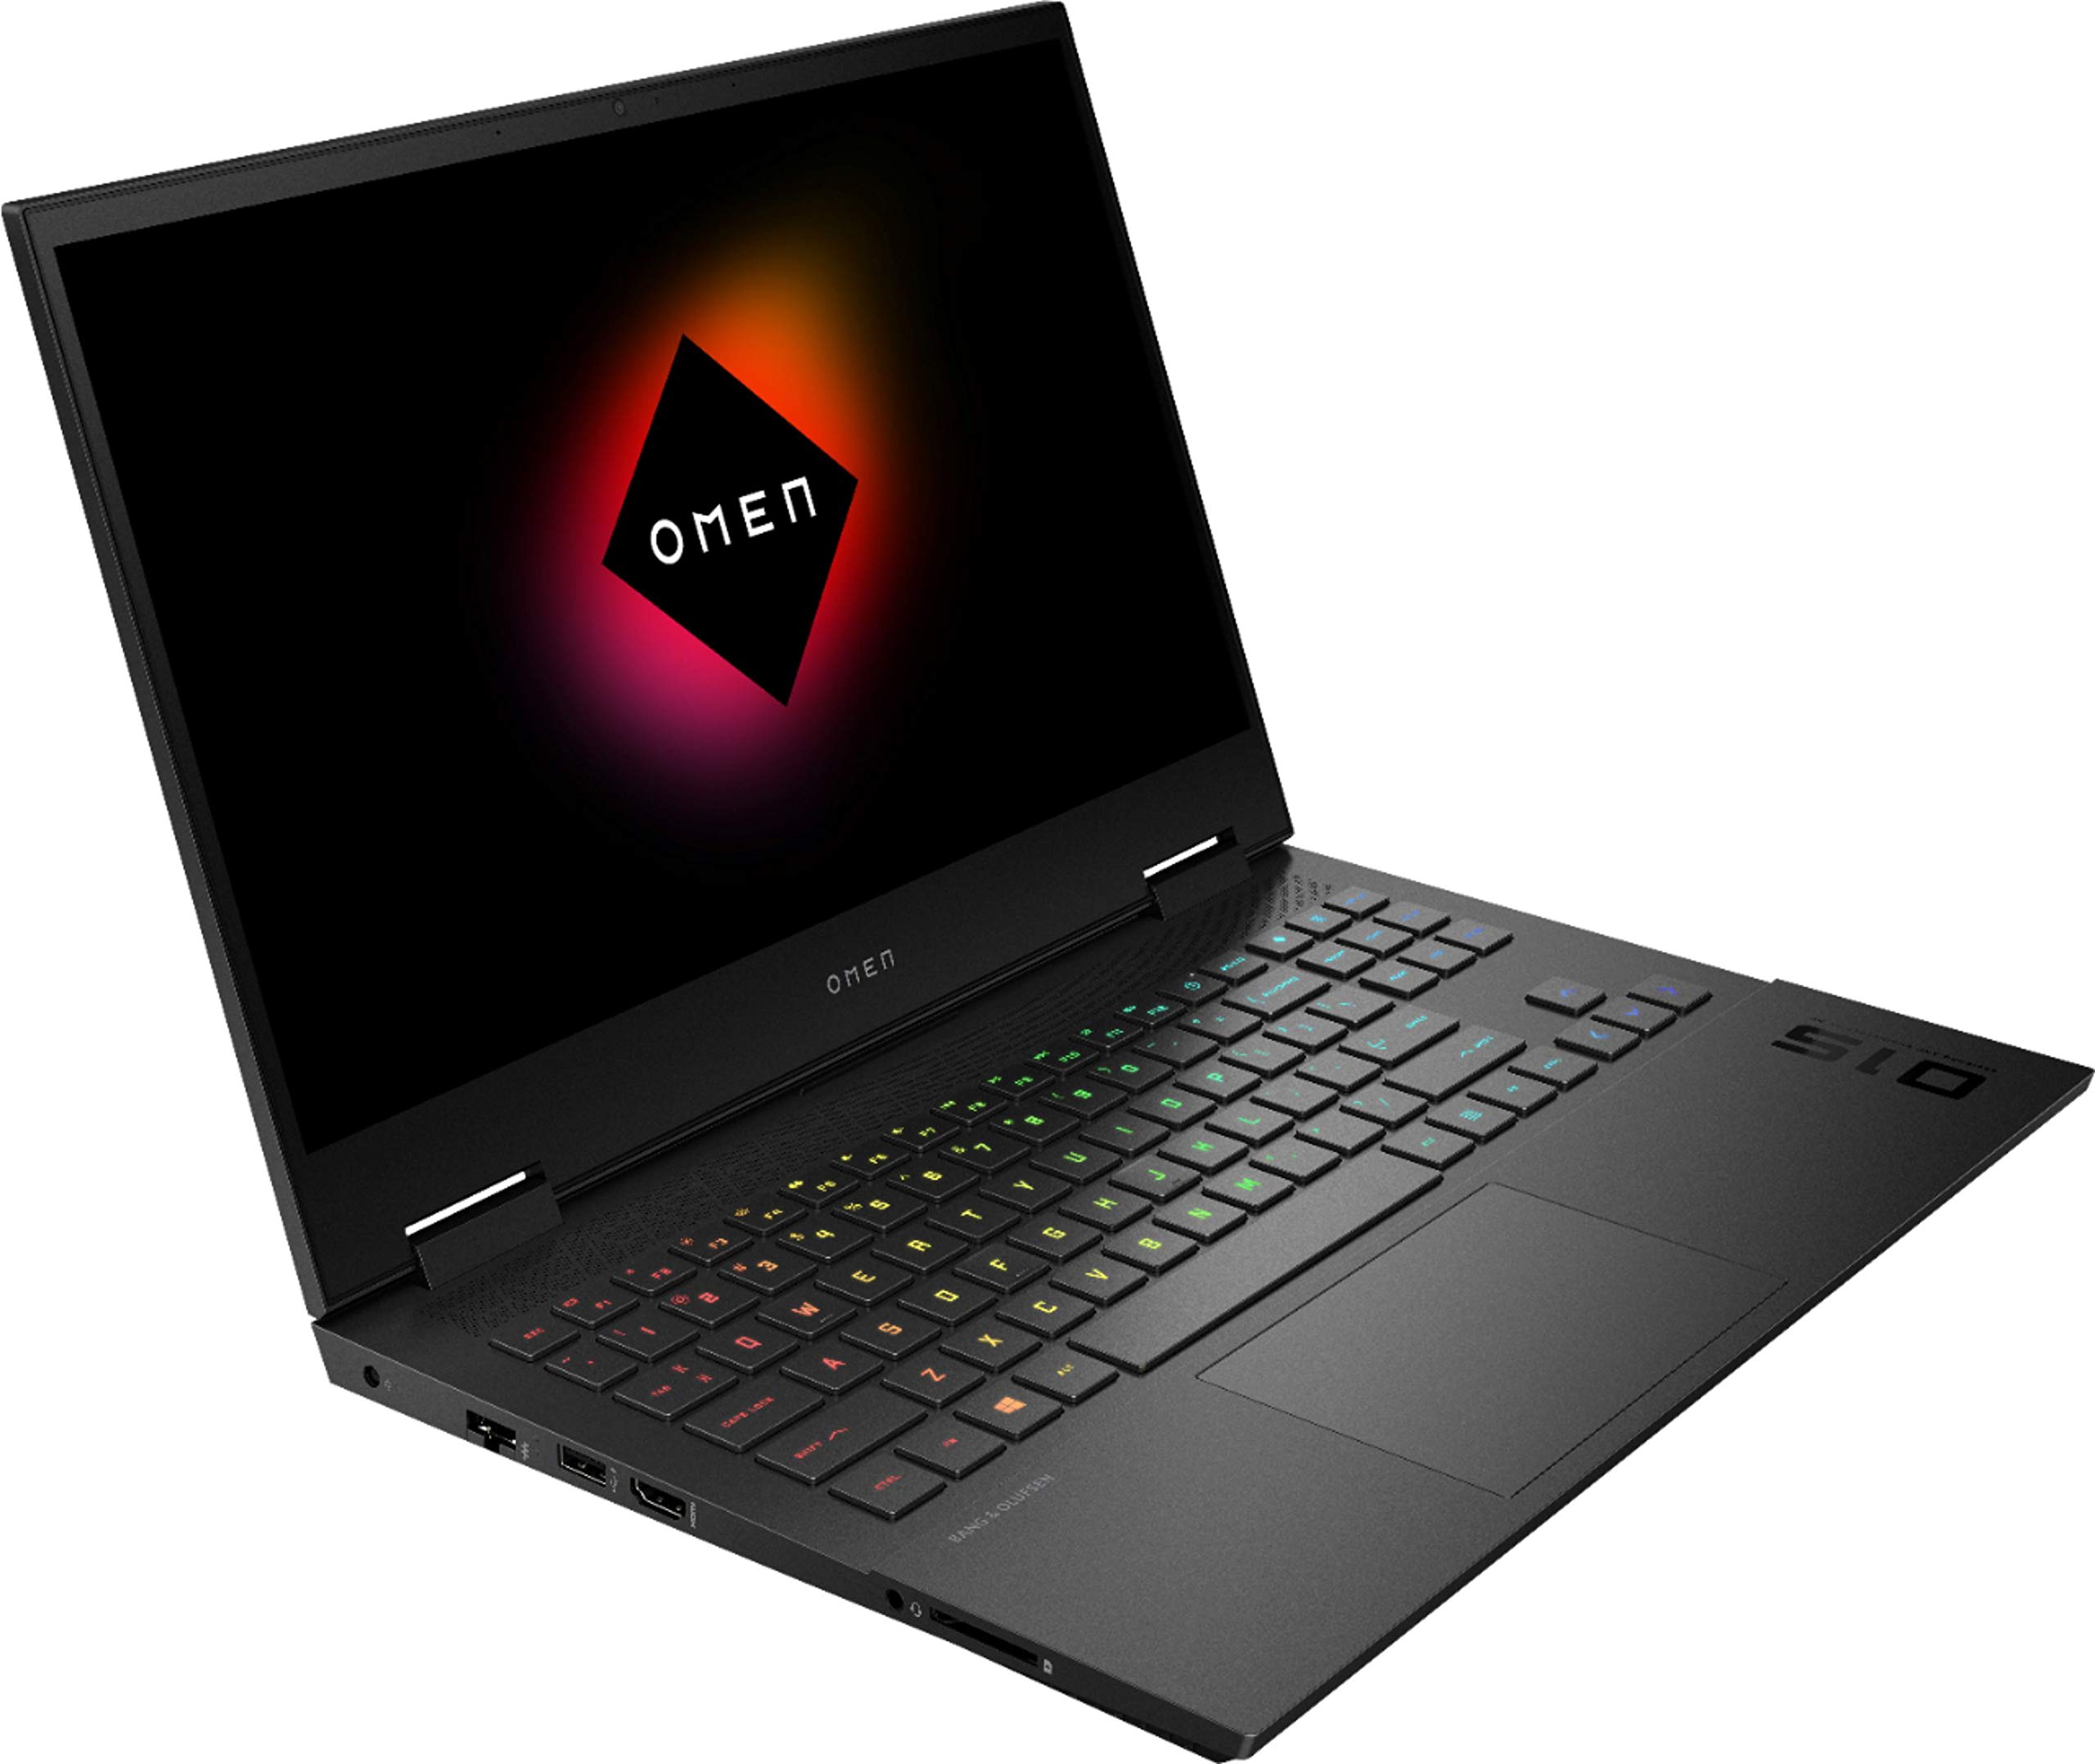 HP Omen laptop with Bluetooth settings icon